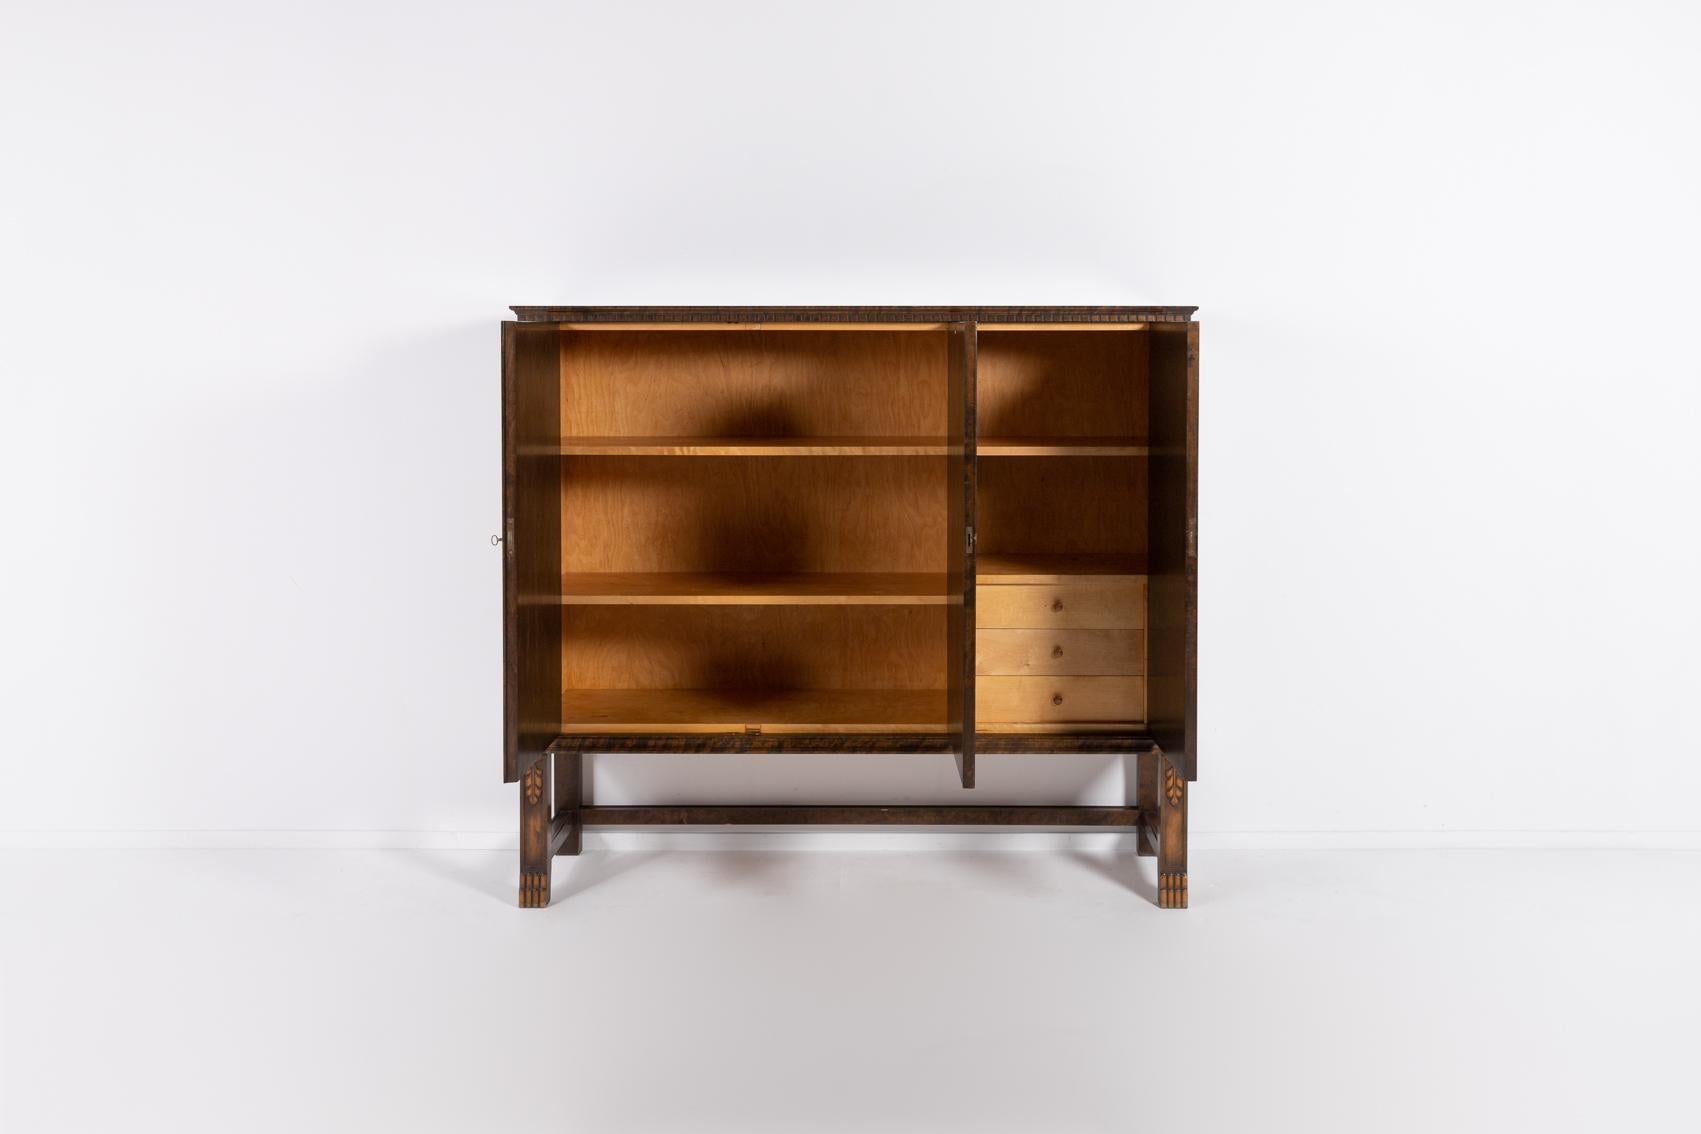 Art deco cabinet in flamed birch designed by Axel Einar Hjorth and made by Bodafors Sweden in 1920s. The dresser has 3 doors where behind them you will find three pull-out drawers and shelves.

Condition
Good, age related wear and marks, some